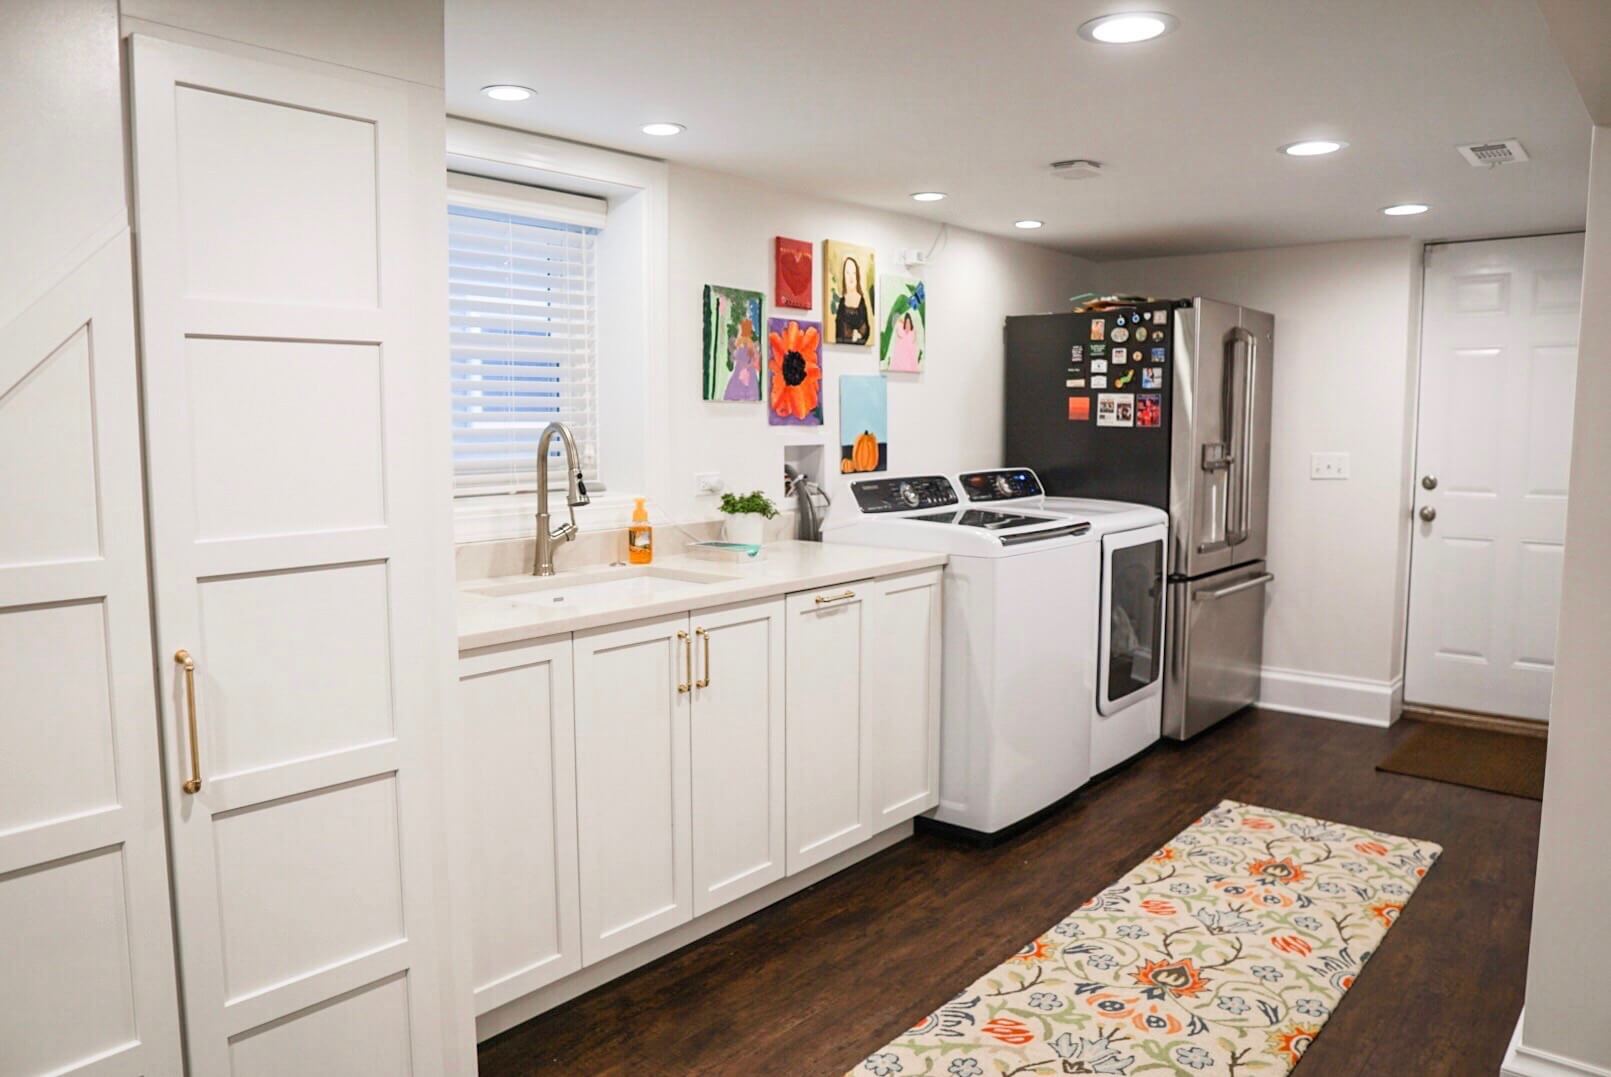 5 Design Must-Haves for Any Laundry Room - Dura Supreme Cabinetry